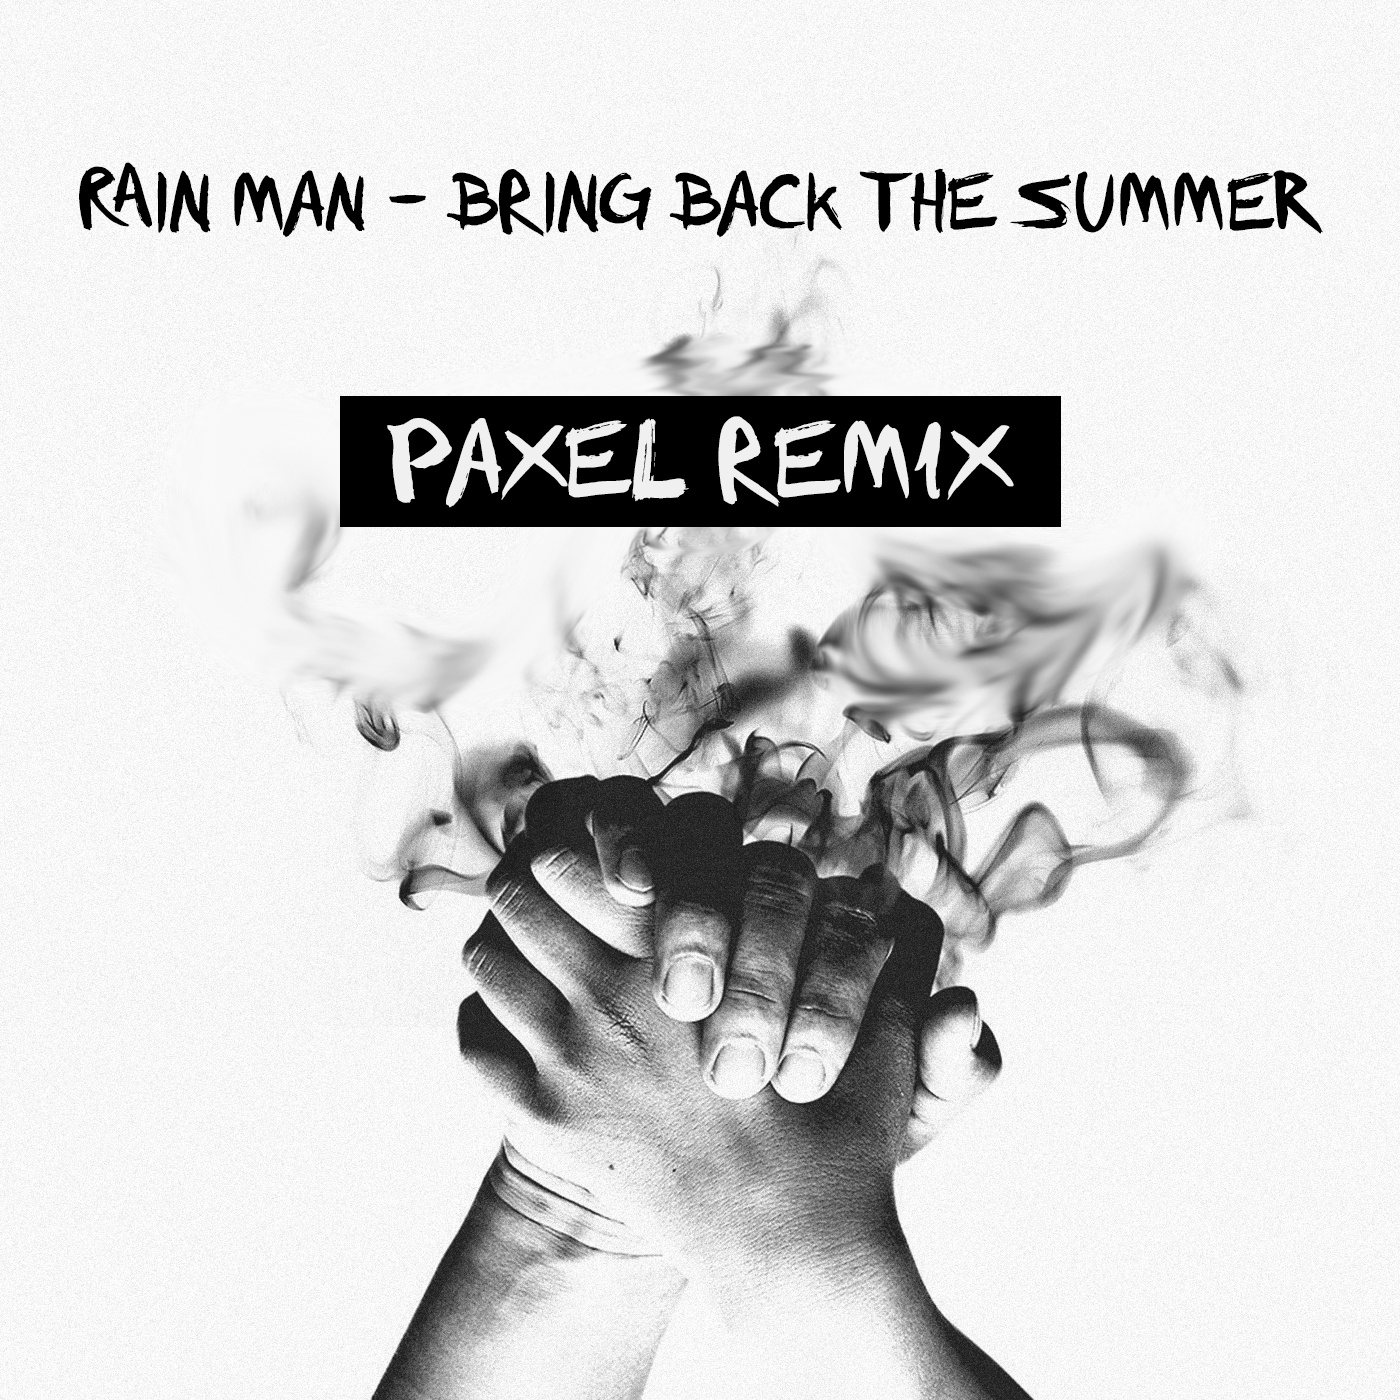 Bring Back The Summer (Paxel Remix)